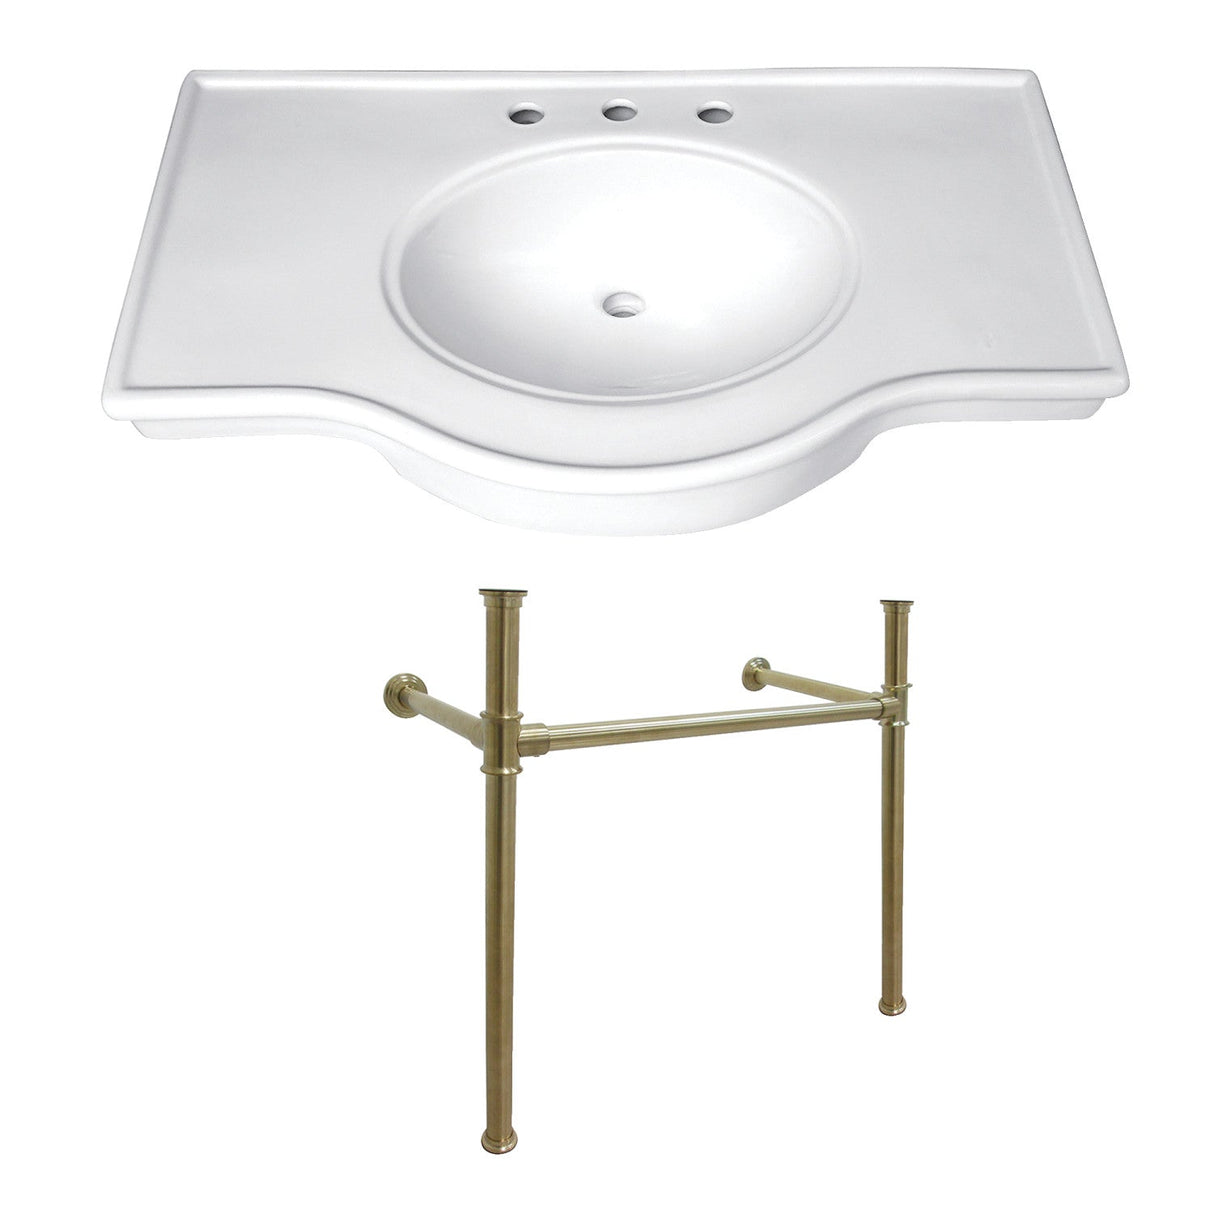 Templeton VPB1377ST Console Sink, White/Brushed Brass